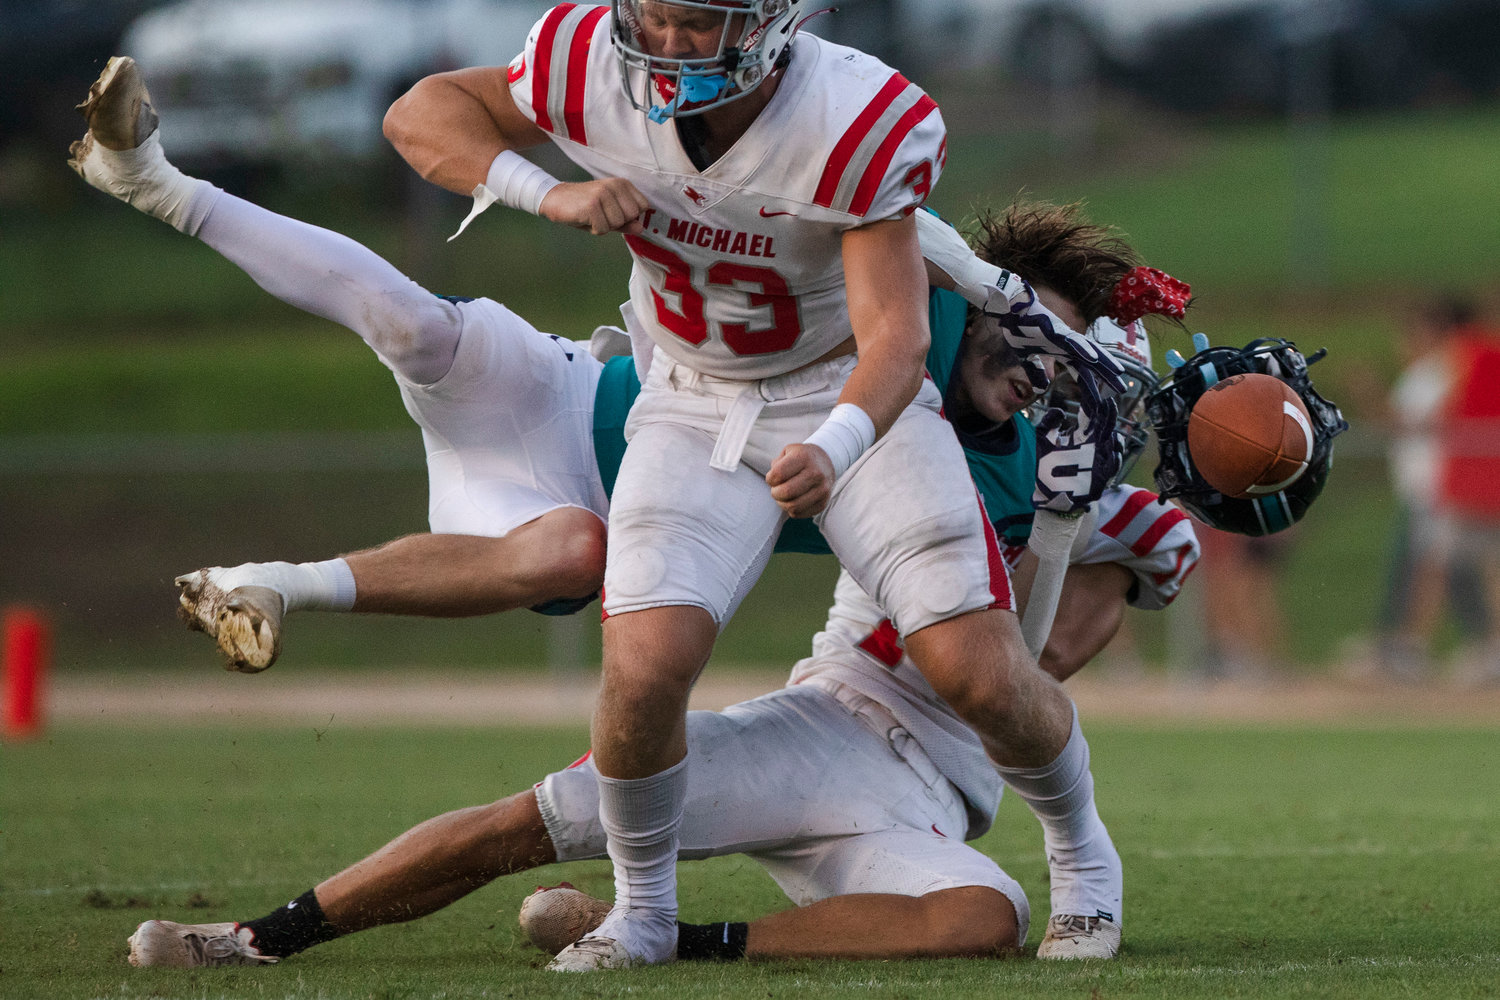 St. Michael senior Clay Barr separates Gulf Shores’ Nick Carris from a reception during the Cardinals’ season-opening game against the Dolphins at Fairhope Municipal Stadium Aug. 18. Barr closed his high school career as a second-team all-state linebacker.